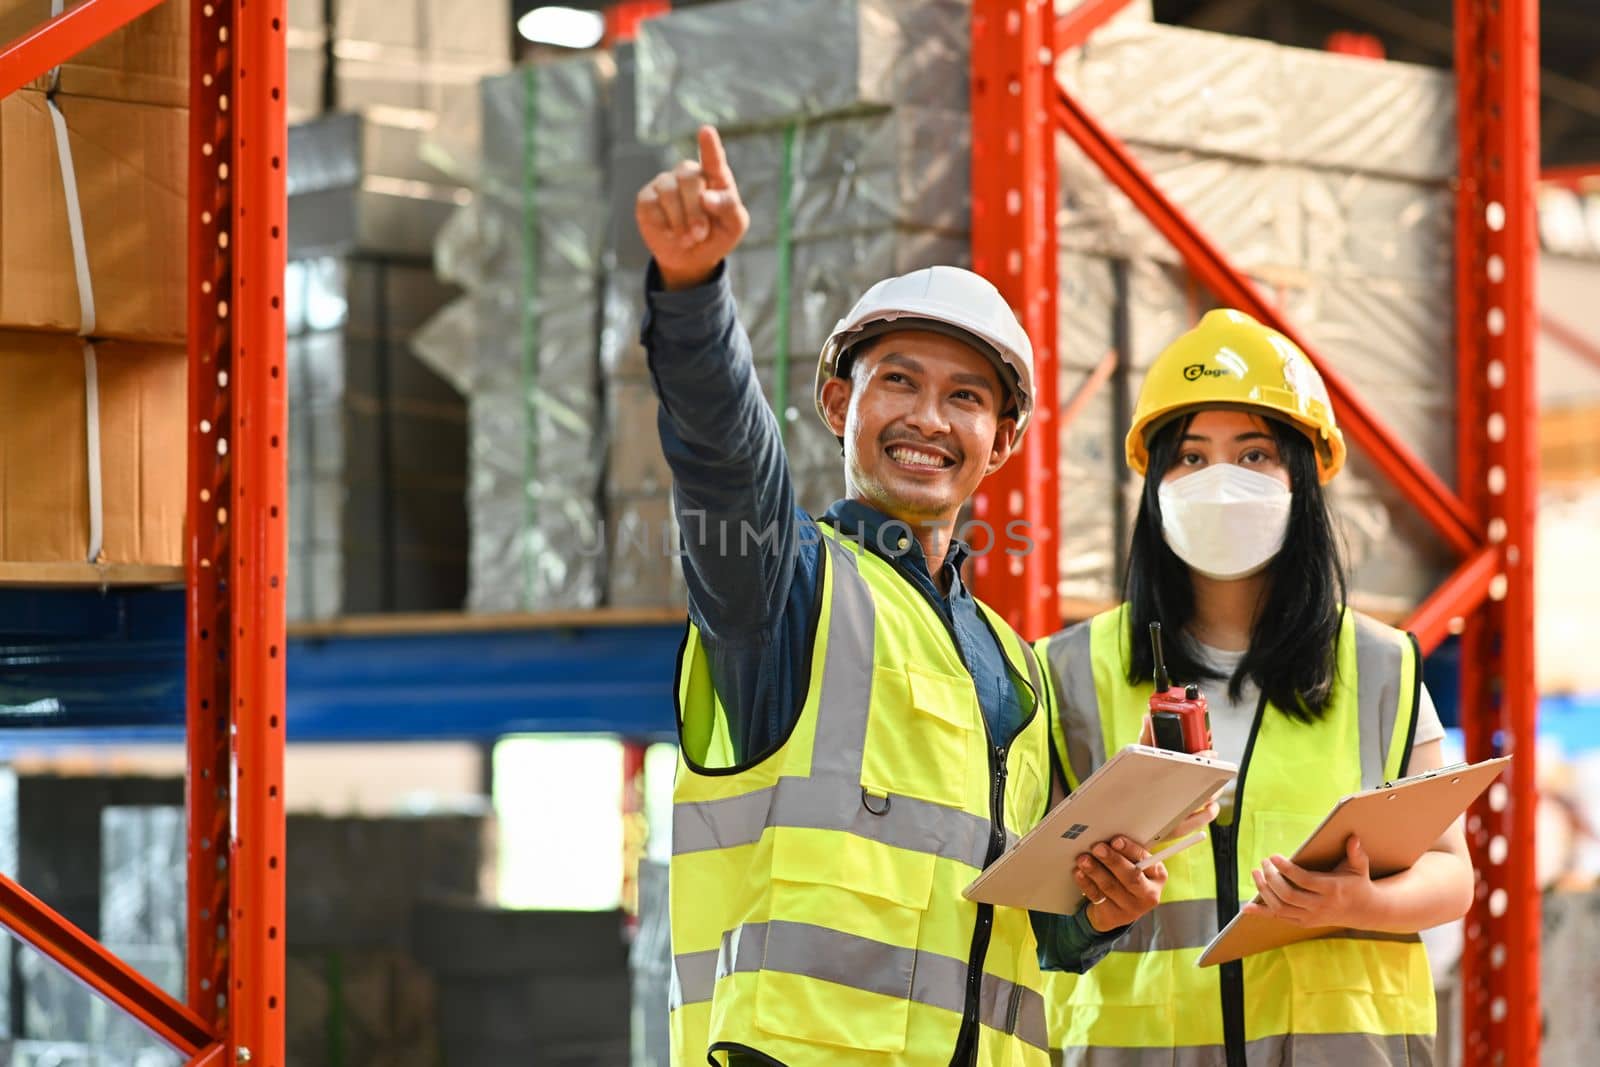 Image of male and female workers wearing hardhats and reflective jacket working together in retail warehouse.